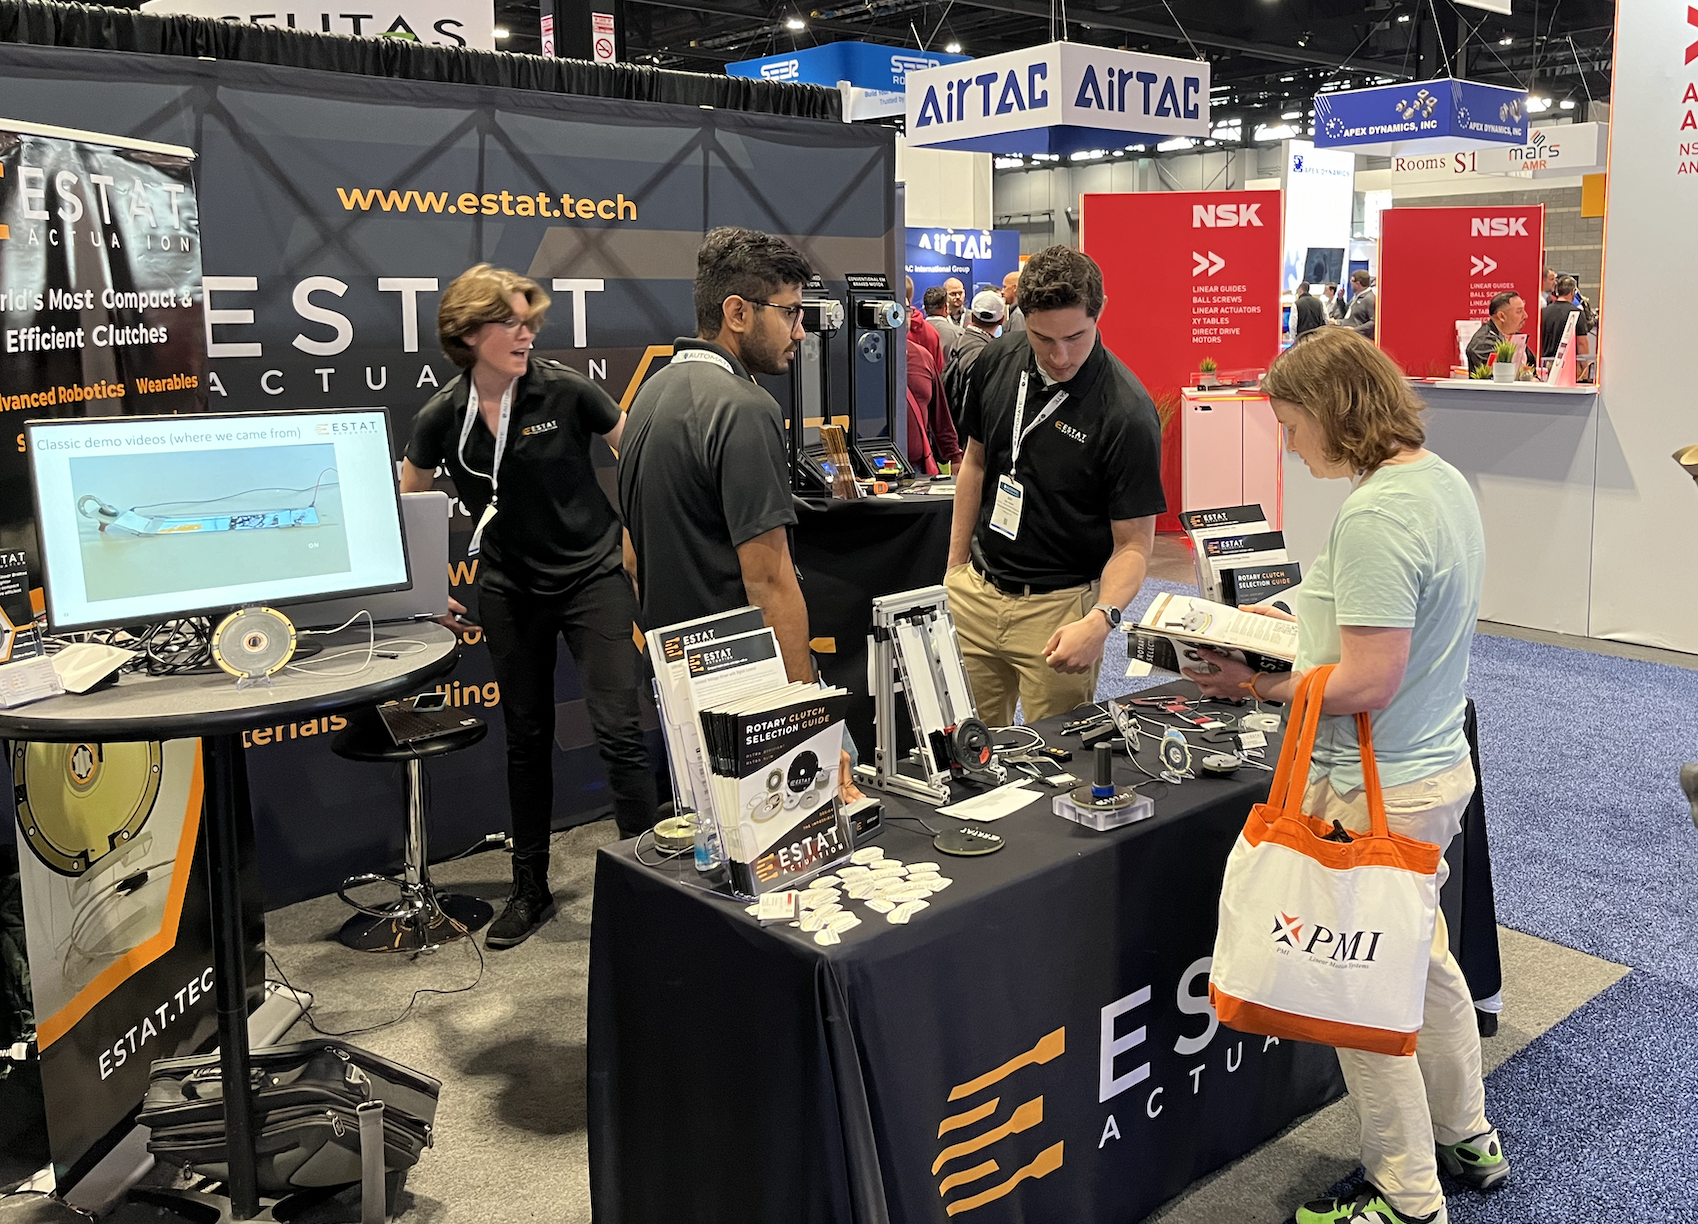 ESTAT's booth was bustling with activity over the three-day Automate conference